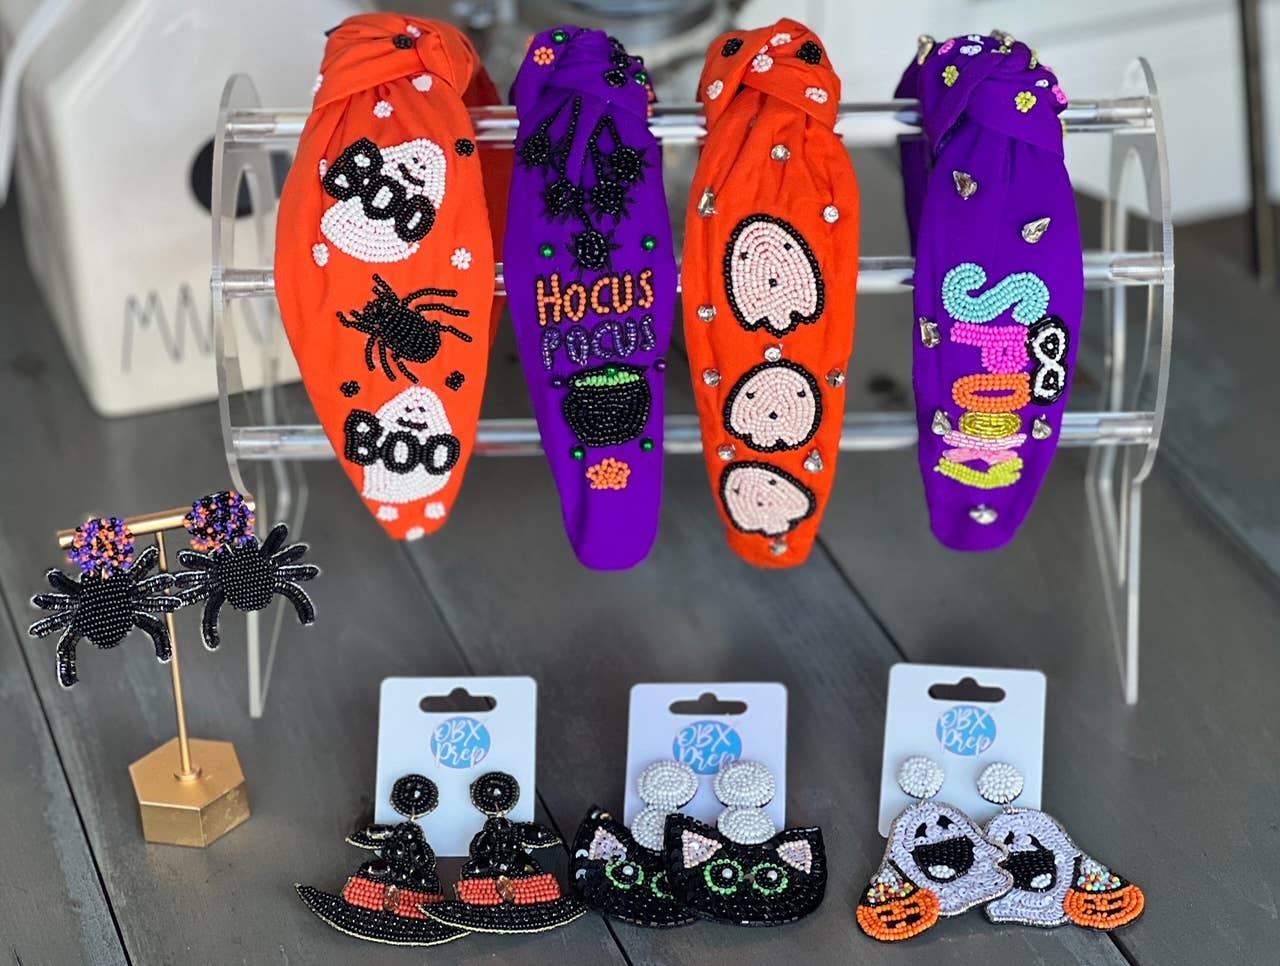 OBX Prep - Boo Spider and Ghost Top Knot Seed Beaded Halloween Headband